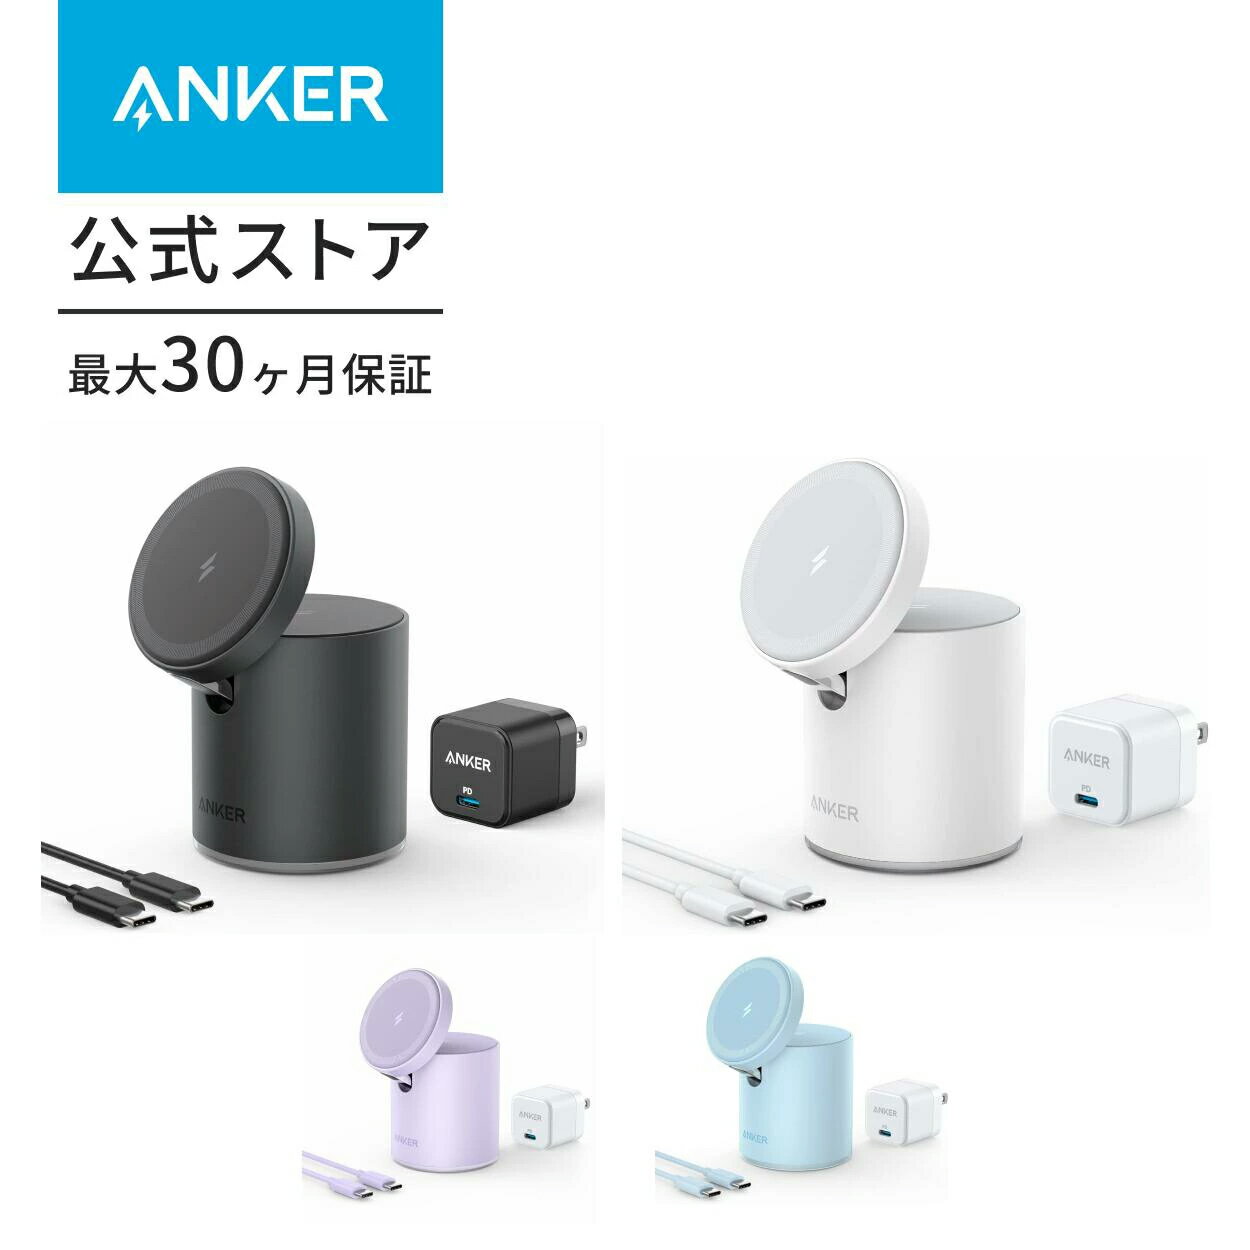 Anker 623 Magnetic Wireless Charger (MagGo)(マグネット式 2-in-1 ワイヤレス充電ステーション)MagSafe対応iPhoneシリーズ専用